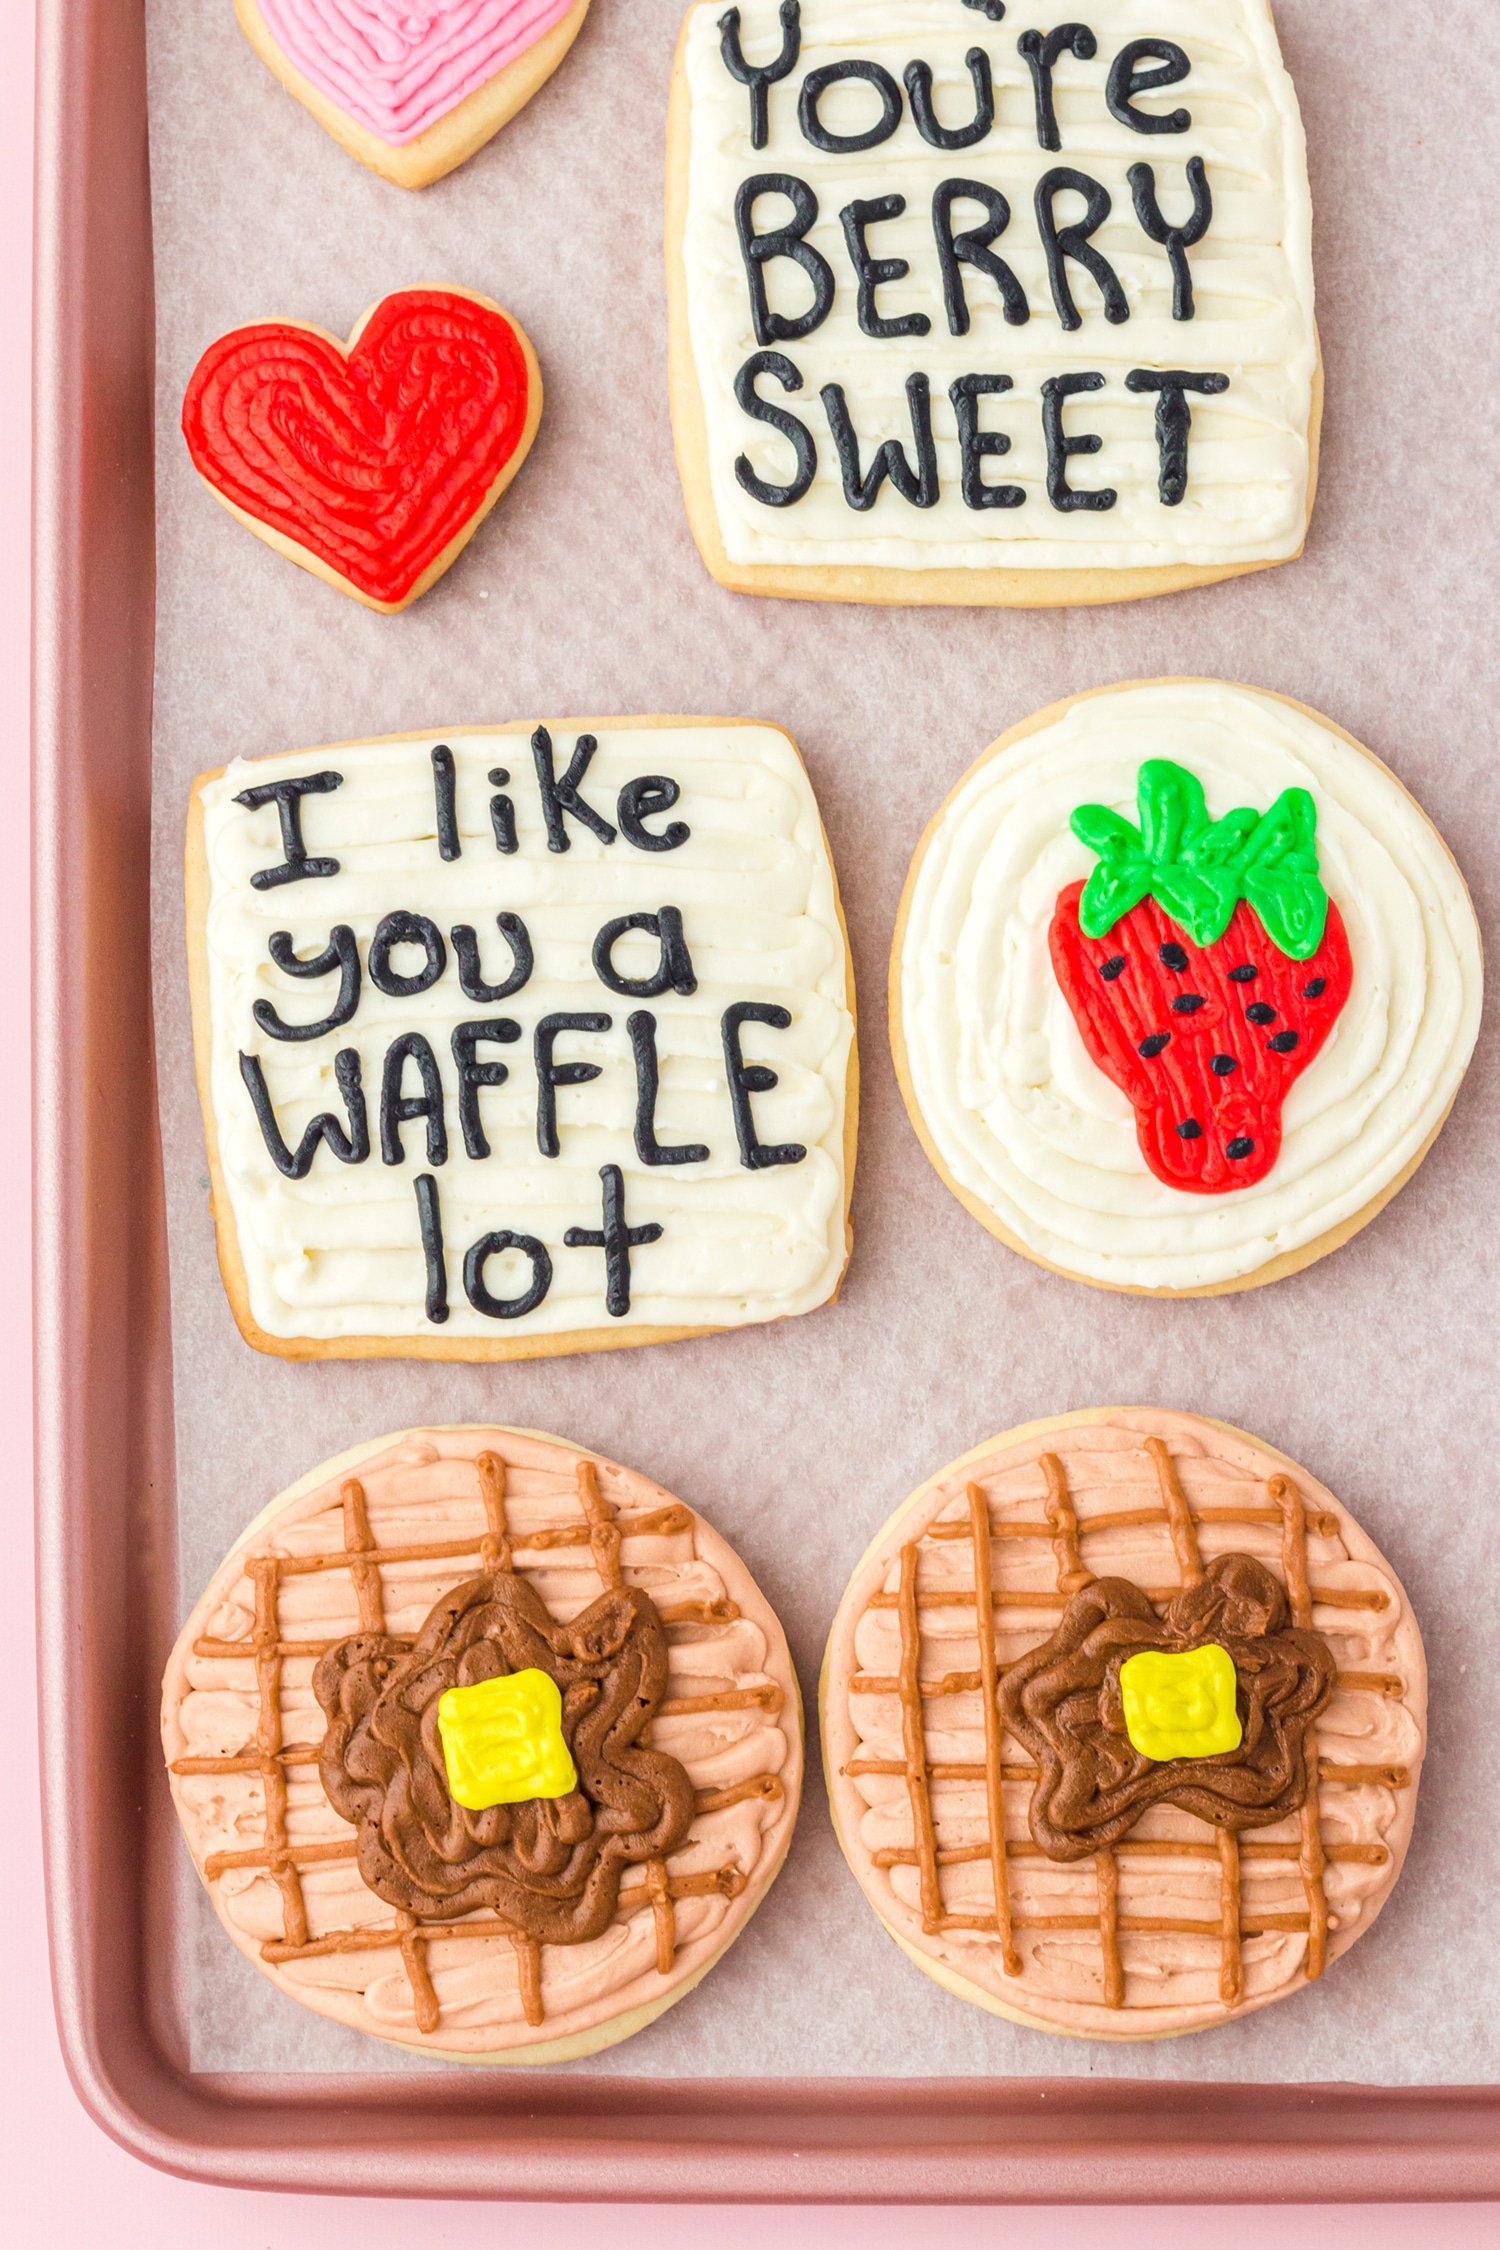 Waffle, strawberry, and heart sugar cookies with "I like you a waffle lot" and "You're berry sweet" cookies on baking sheet